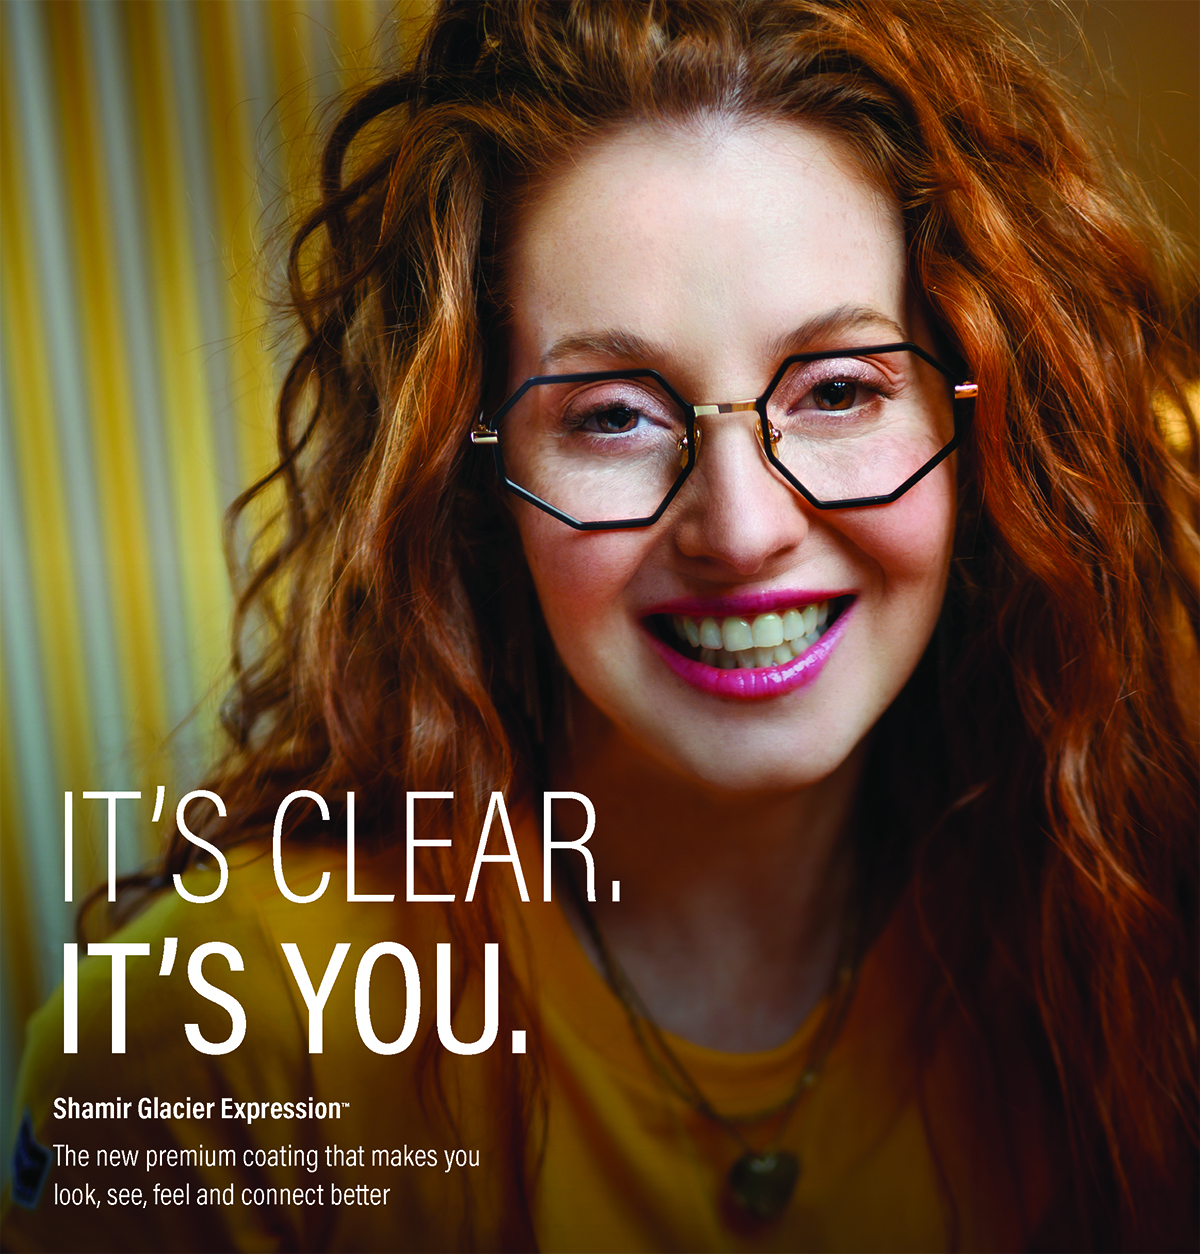 Shamir says that the company's Glacier Expression lens coating helps spectacle wearers see better and gain confidence.